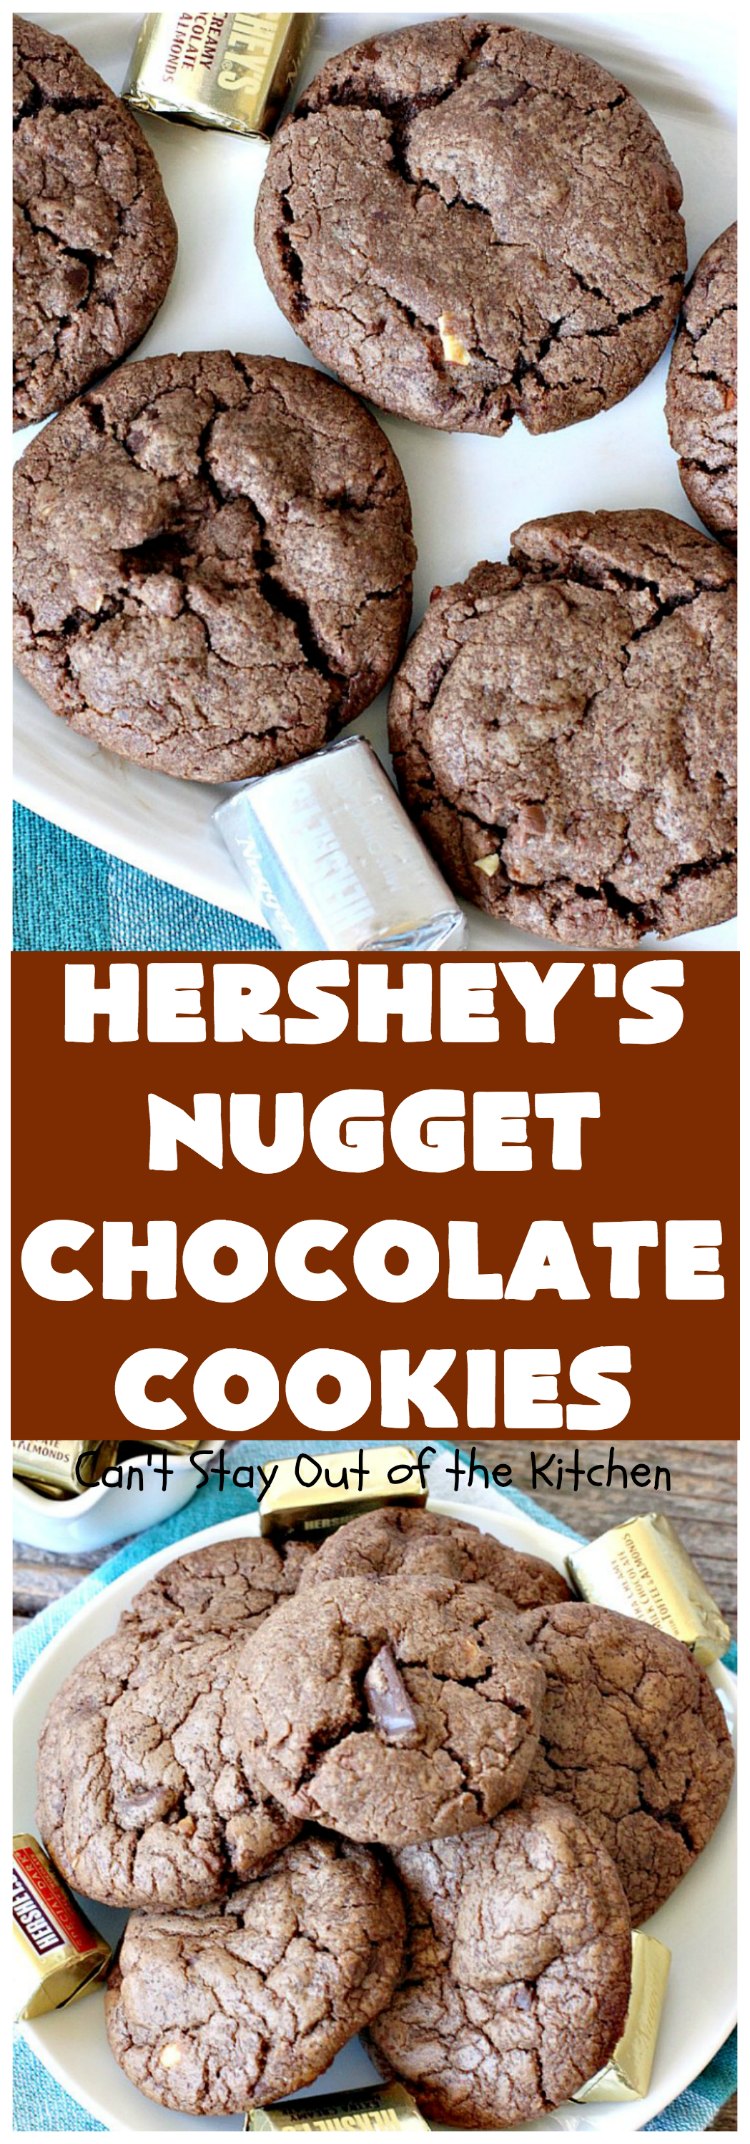 Hershey's Nugget Chocolate Cookies | Can't Stay Out of the Kitchen